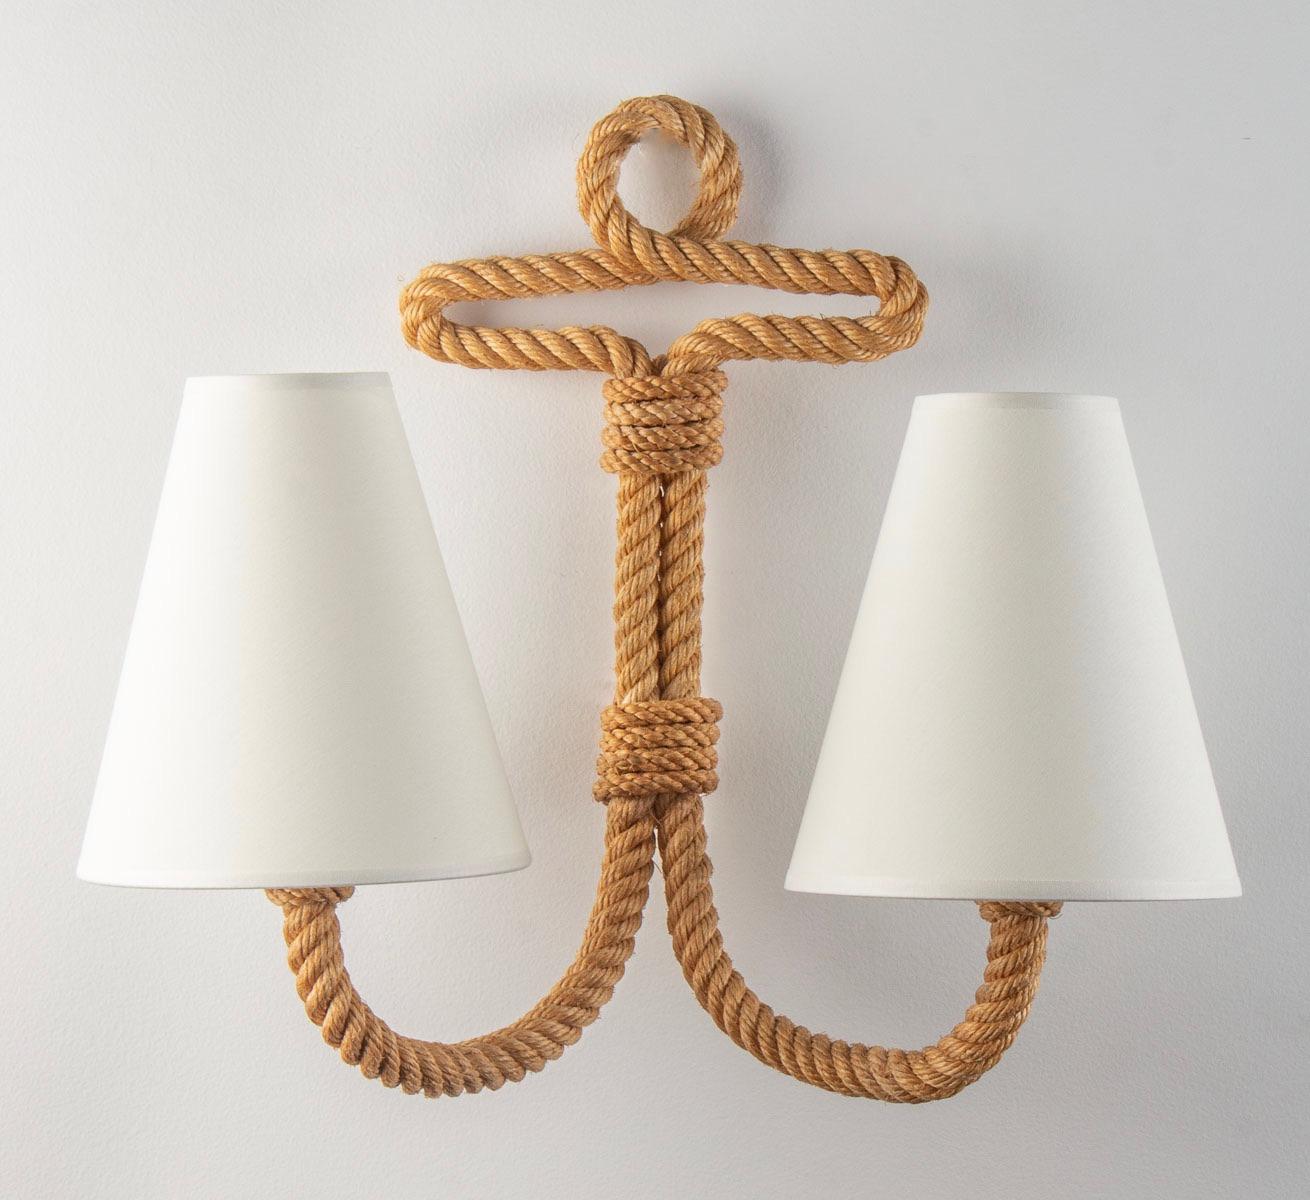 Composed of a single rope in the form of ink on the upper part and on the lower part by two arms of light going up distributed on each side of the wall lamp, they are dressed with lampshade of off-white color.
2 bulbs per sconce

Adrien Audoux and